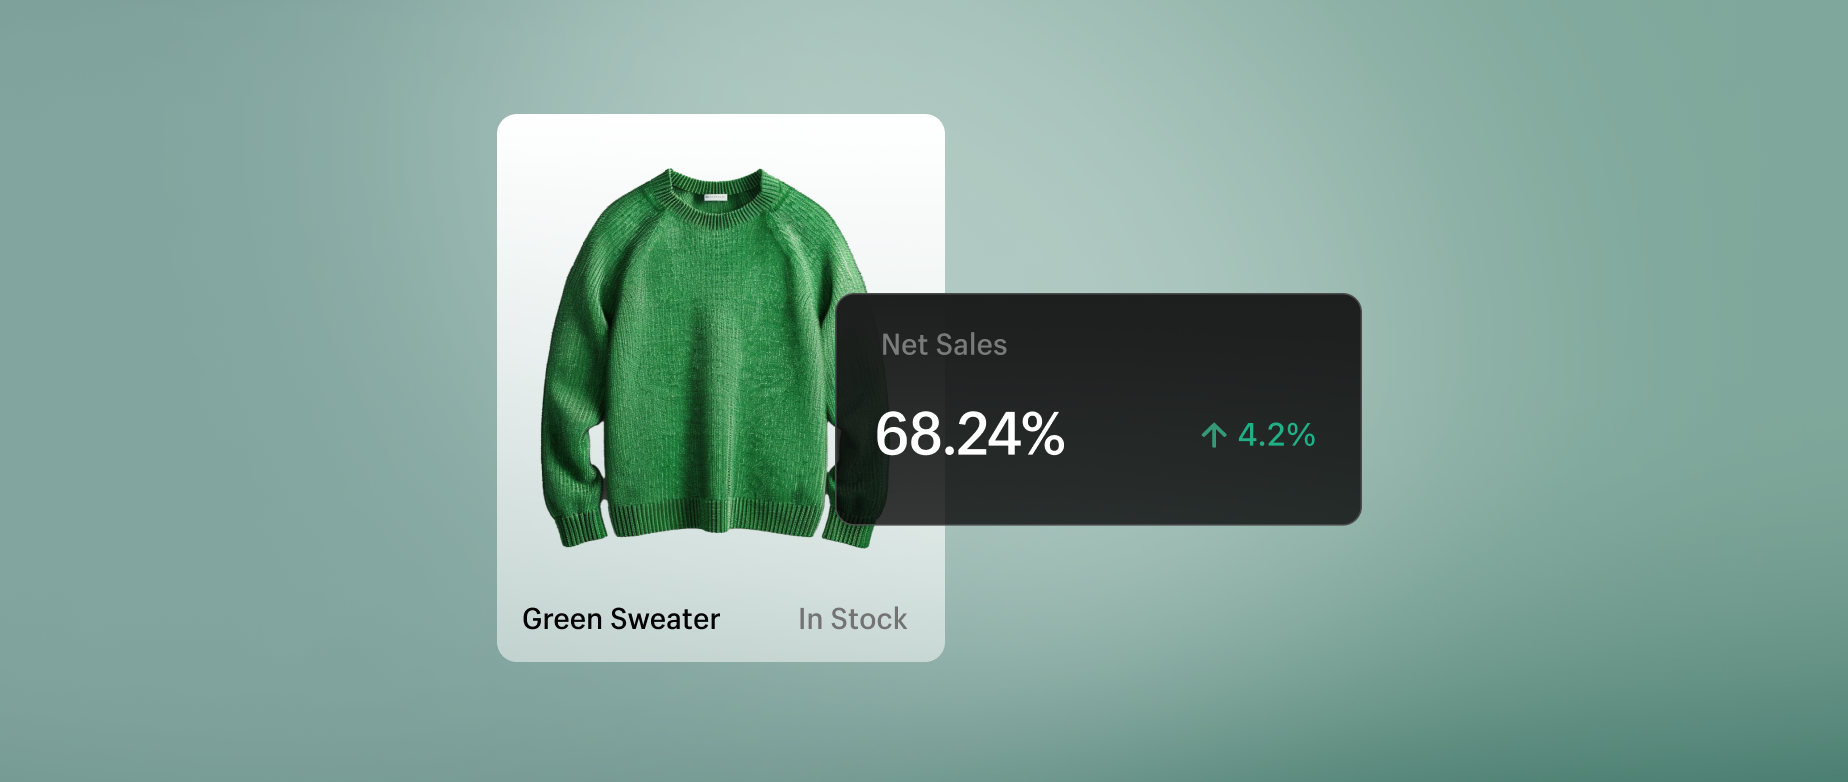 A green sweater with net sales stats on a light green background.